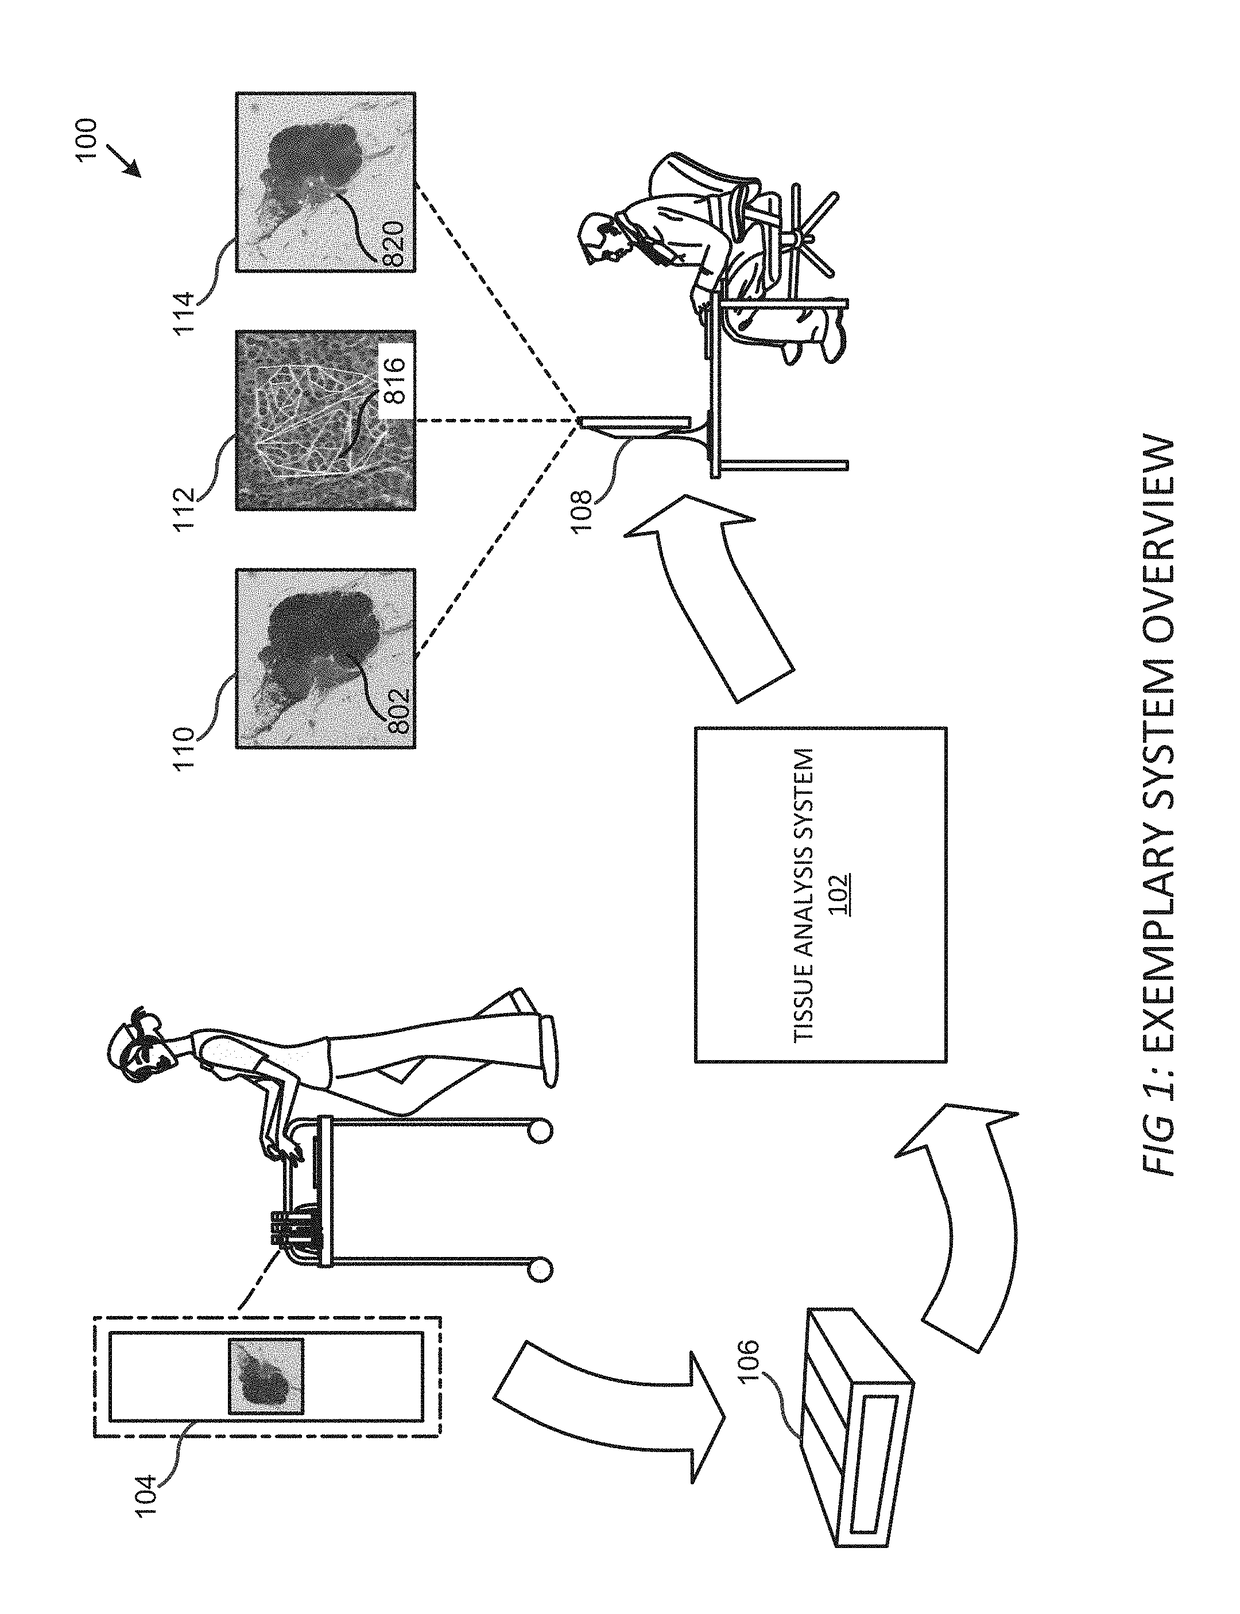 Systems, methods, and apparatuses for digital histopathological imaging for prescreened detection of cancer and other abnormalities